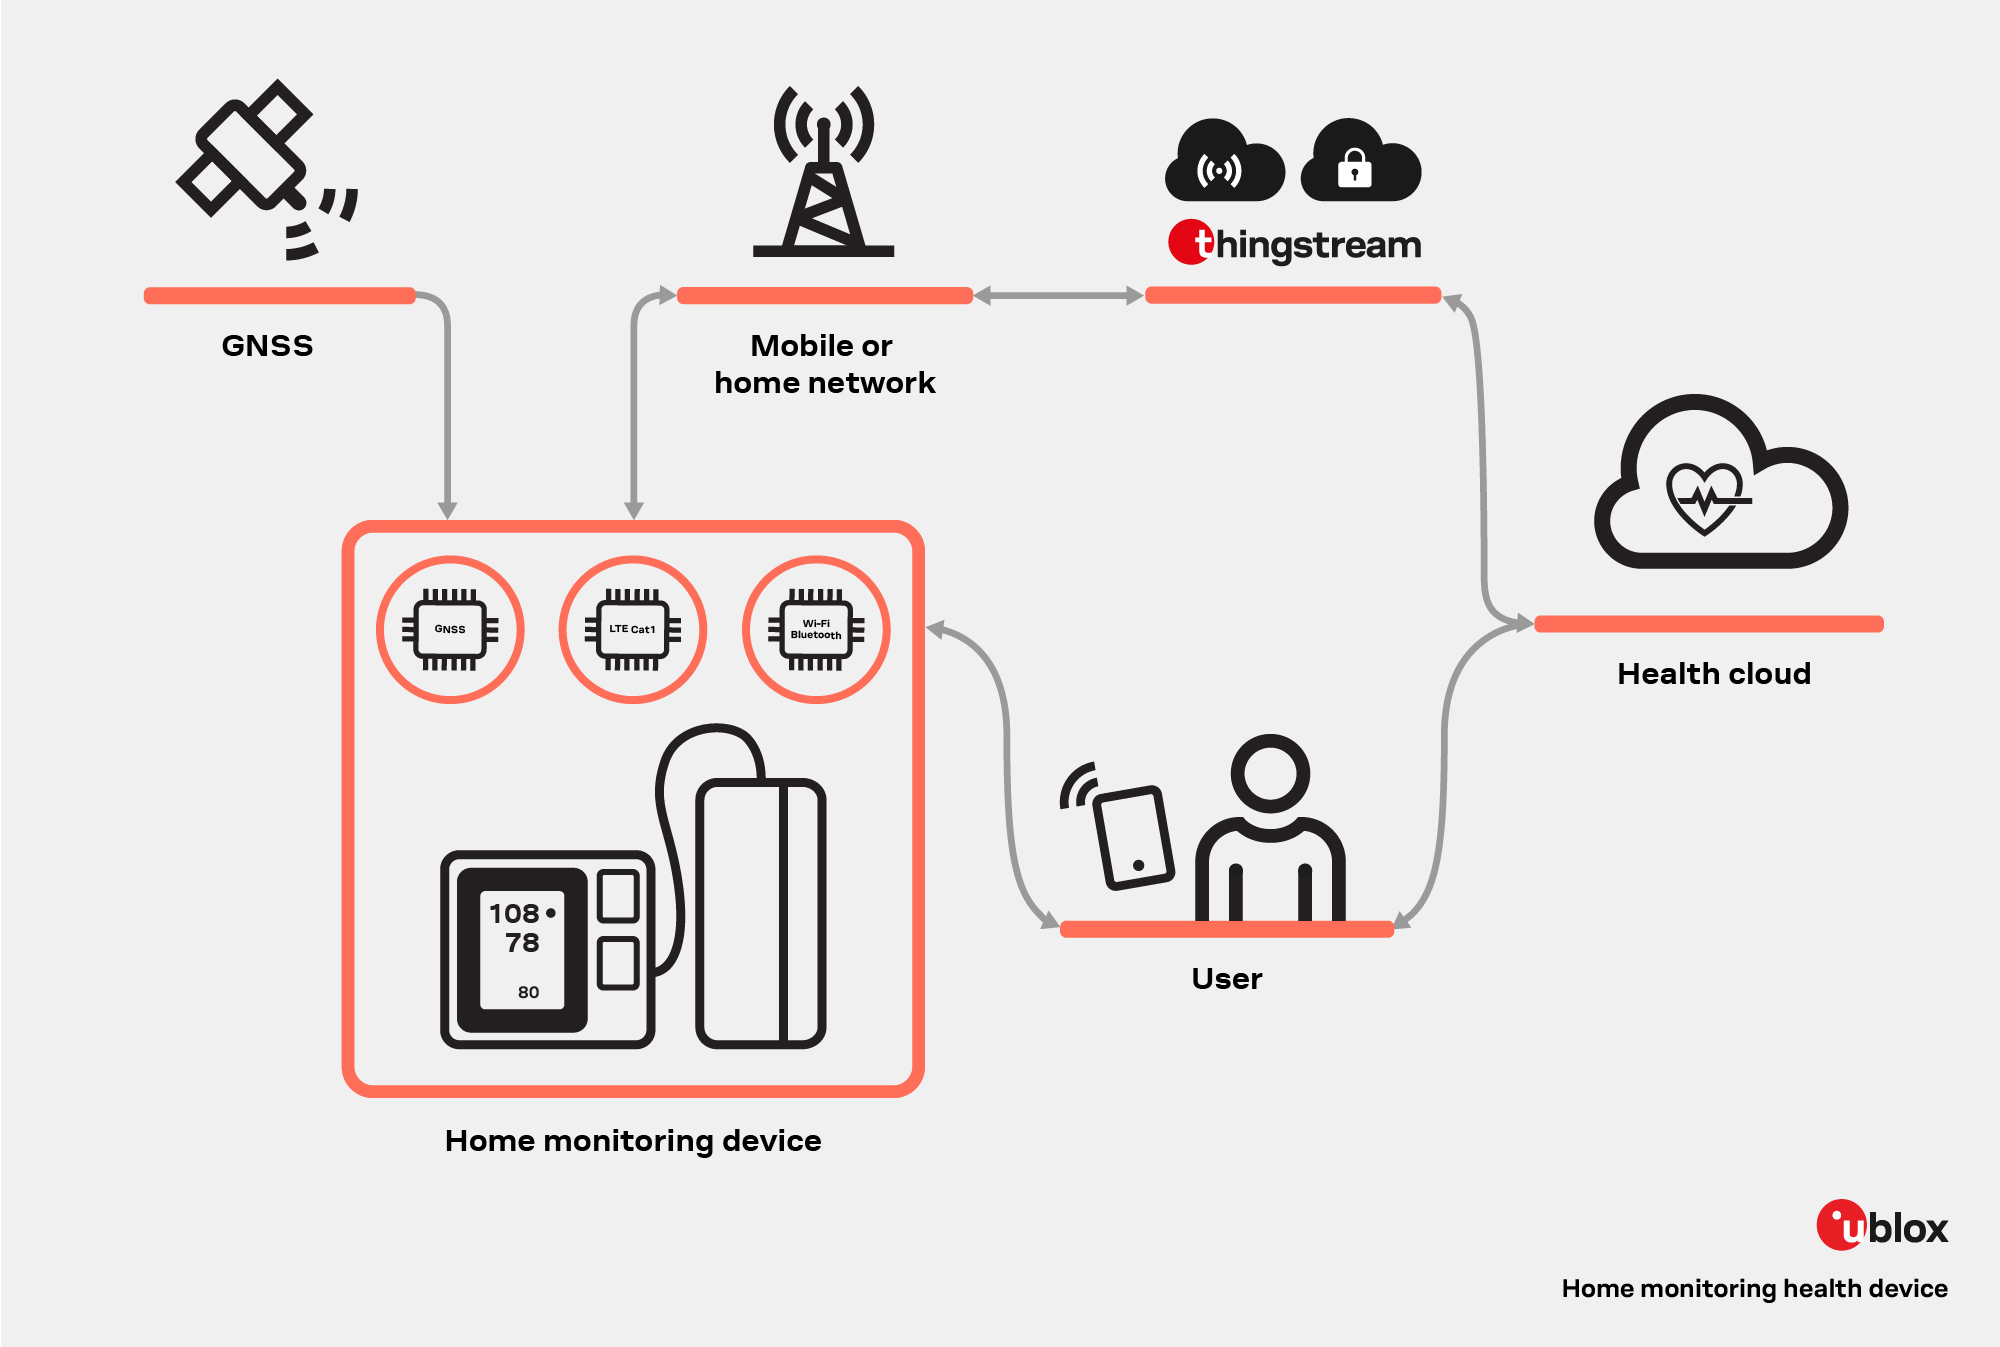 Example of solution architecture for home monitoring health device